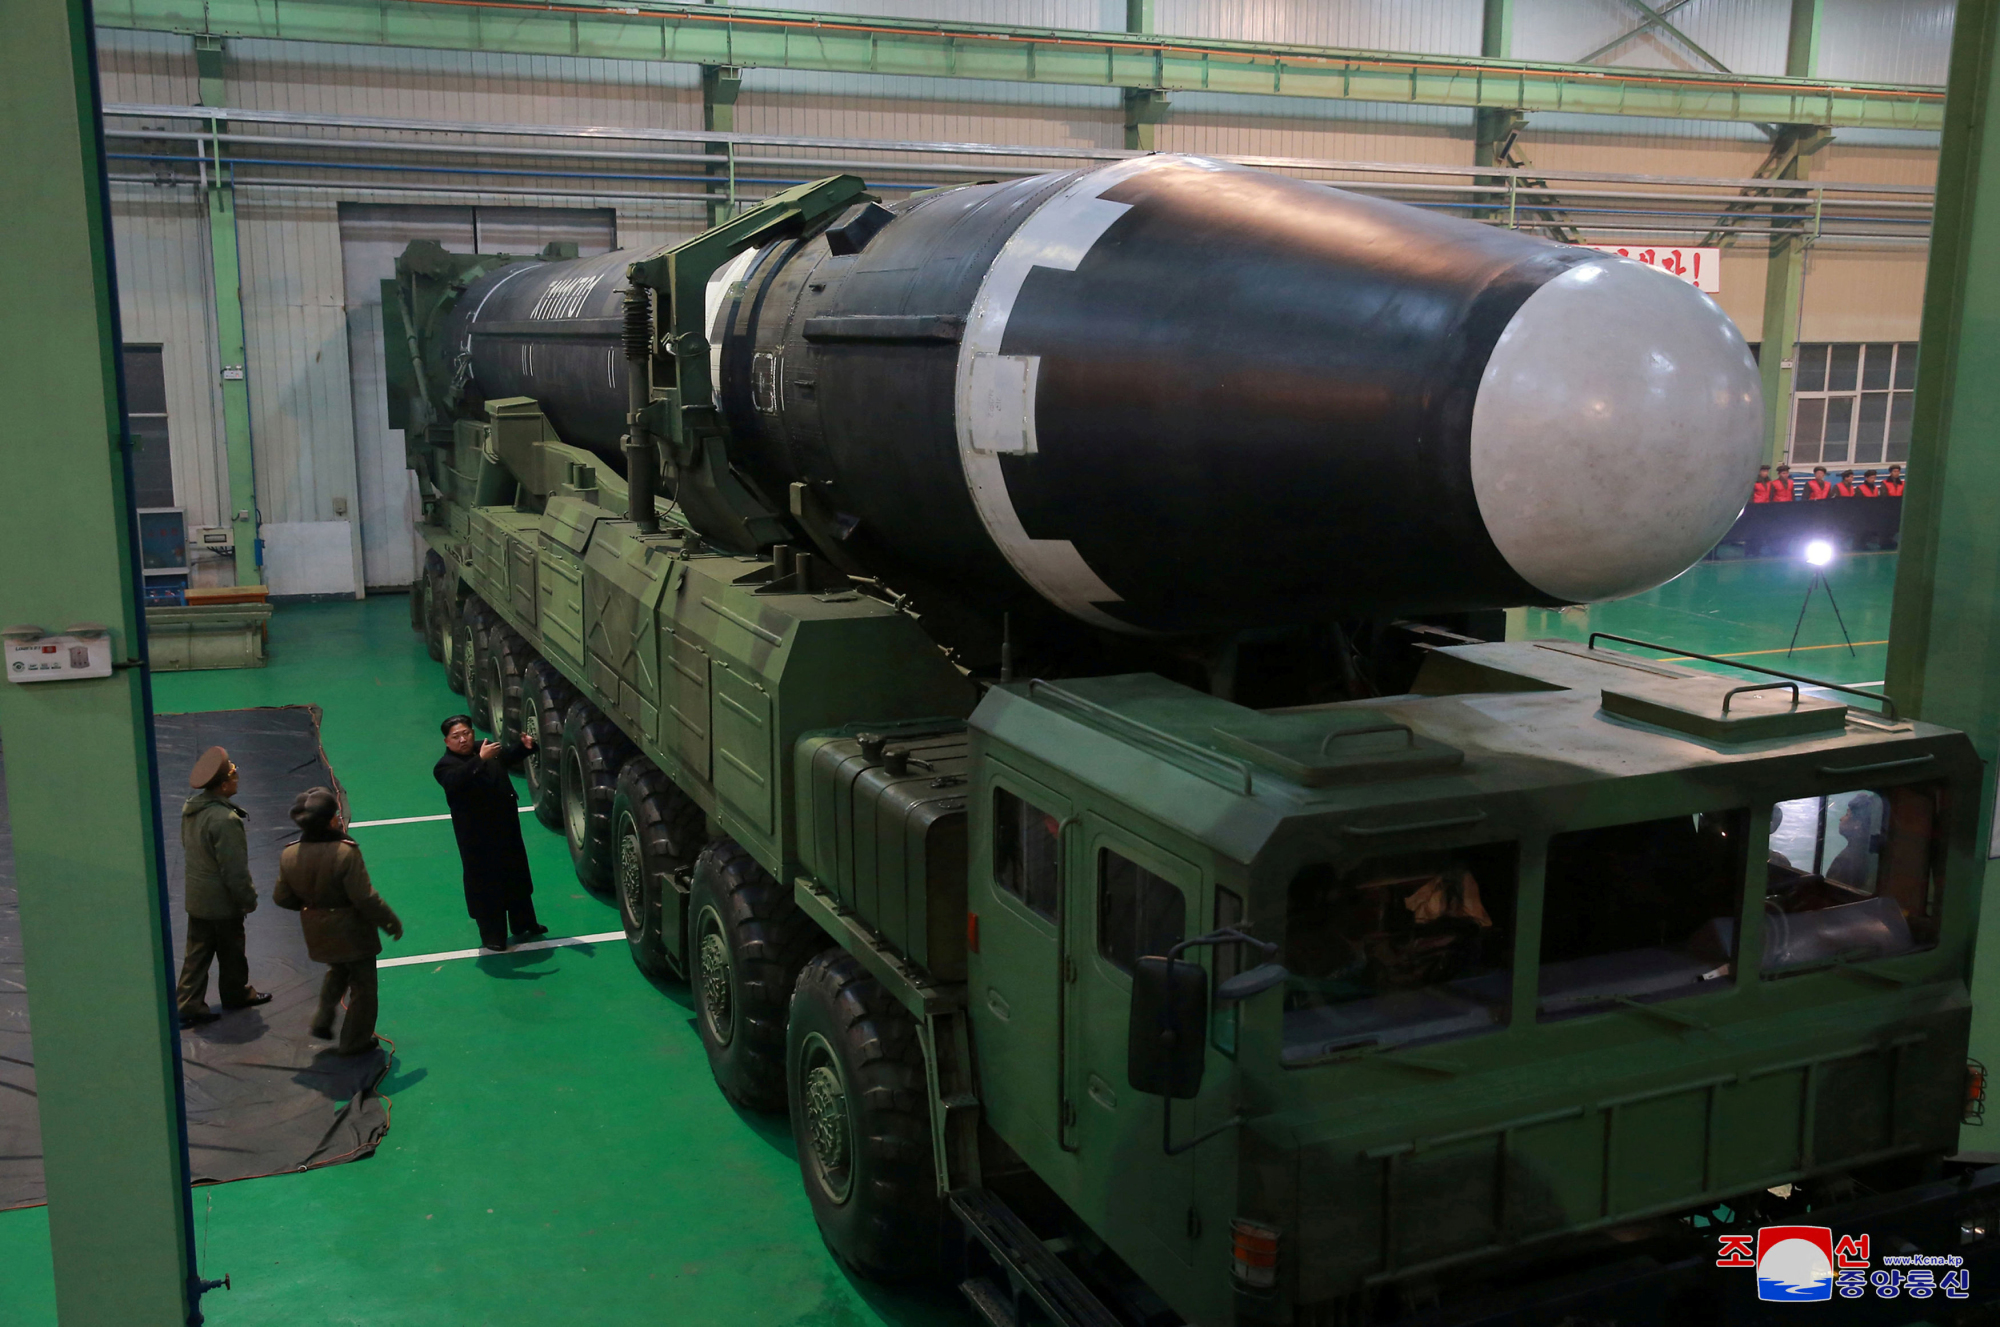 North Korean leader Kim Jong Un is seen next to a newly developed Hwasong-15 intercontinental ballistic missile in this undated photo released Thursday. | REUTERS